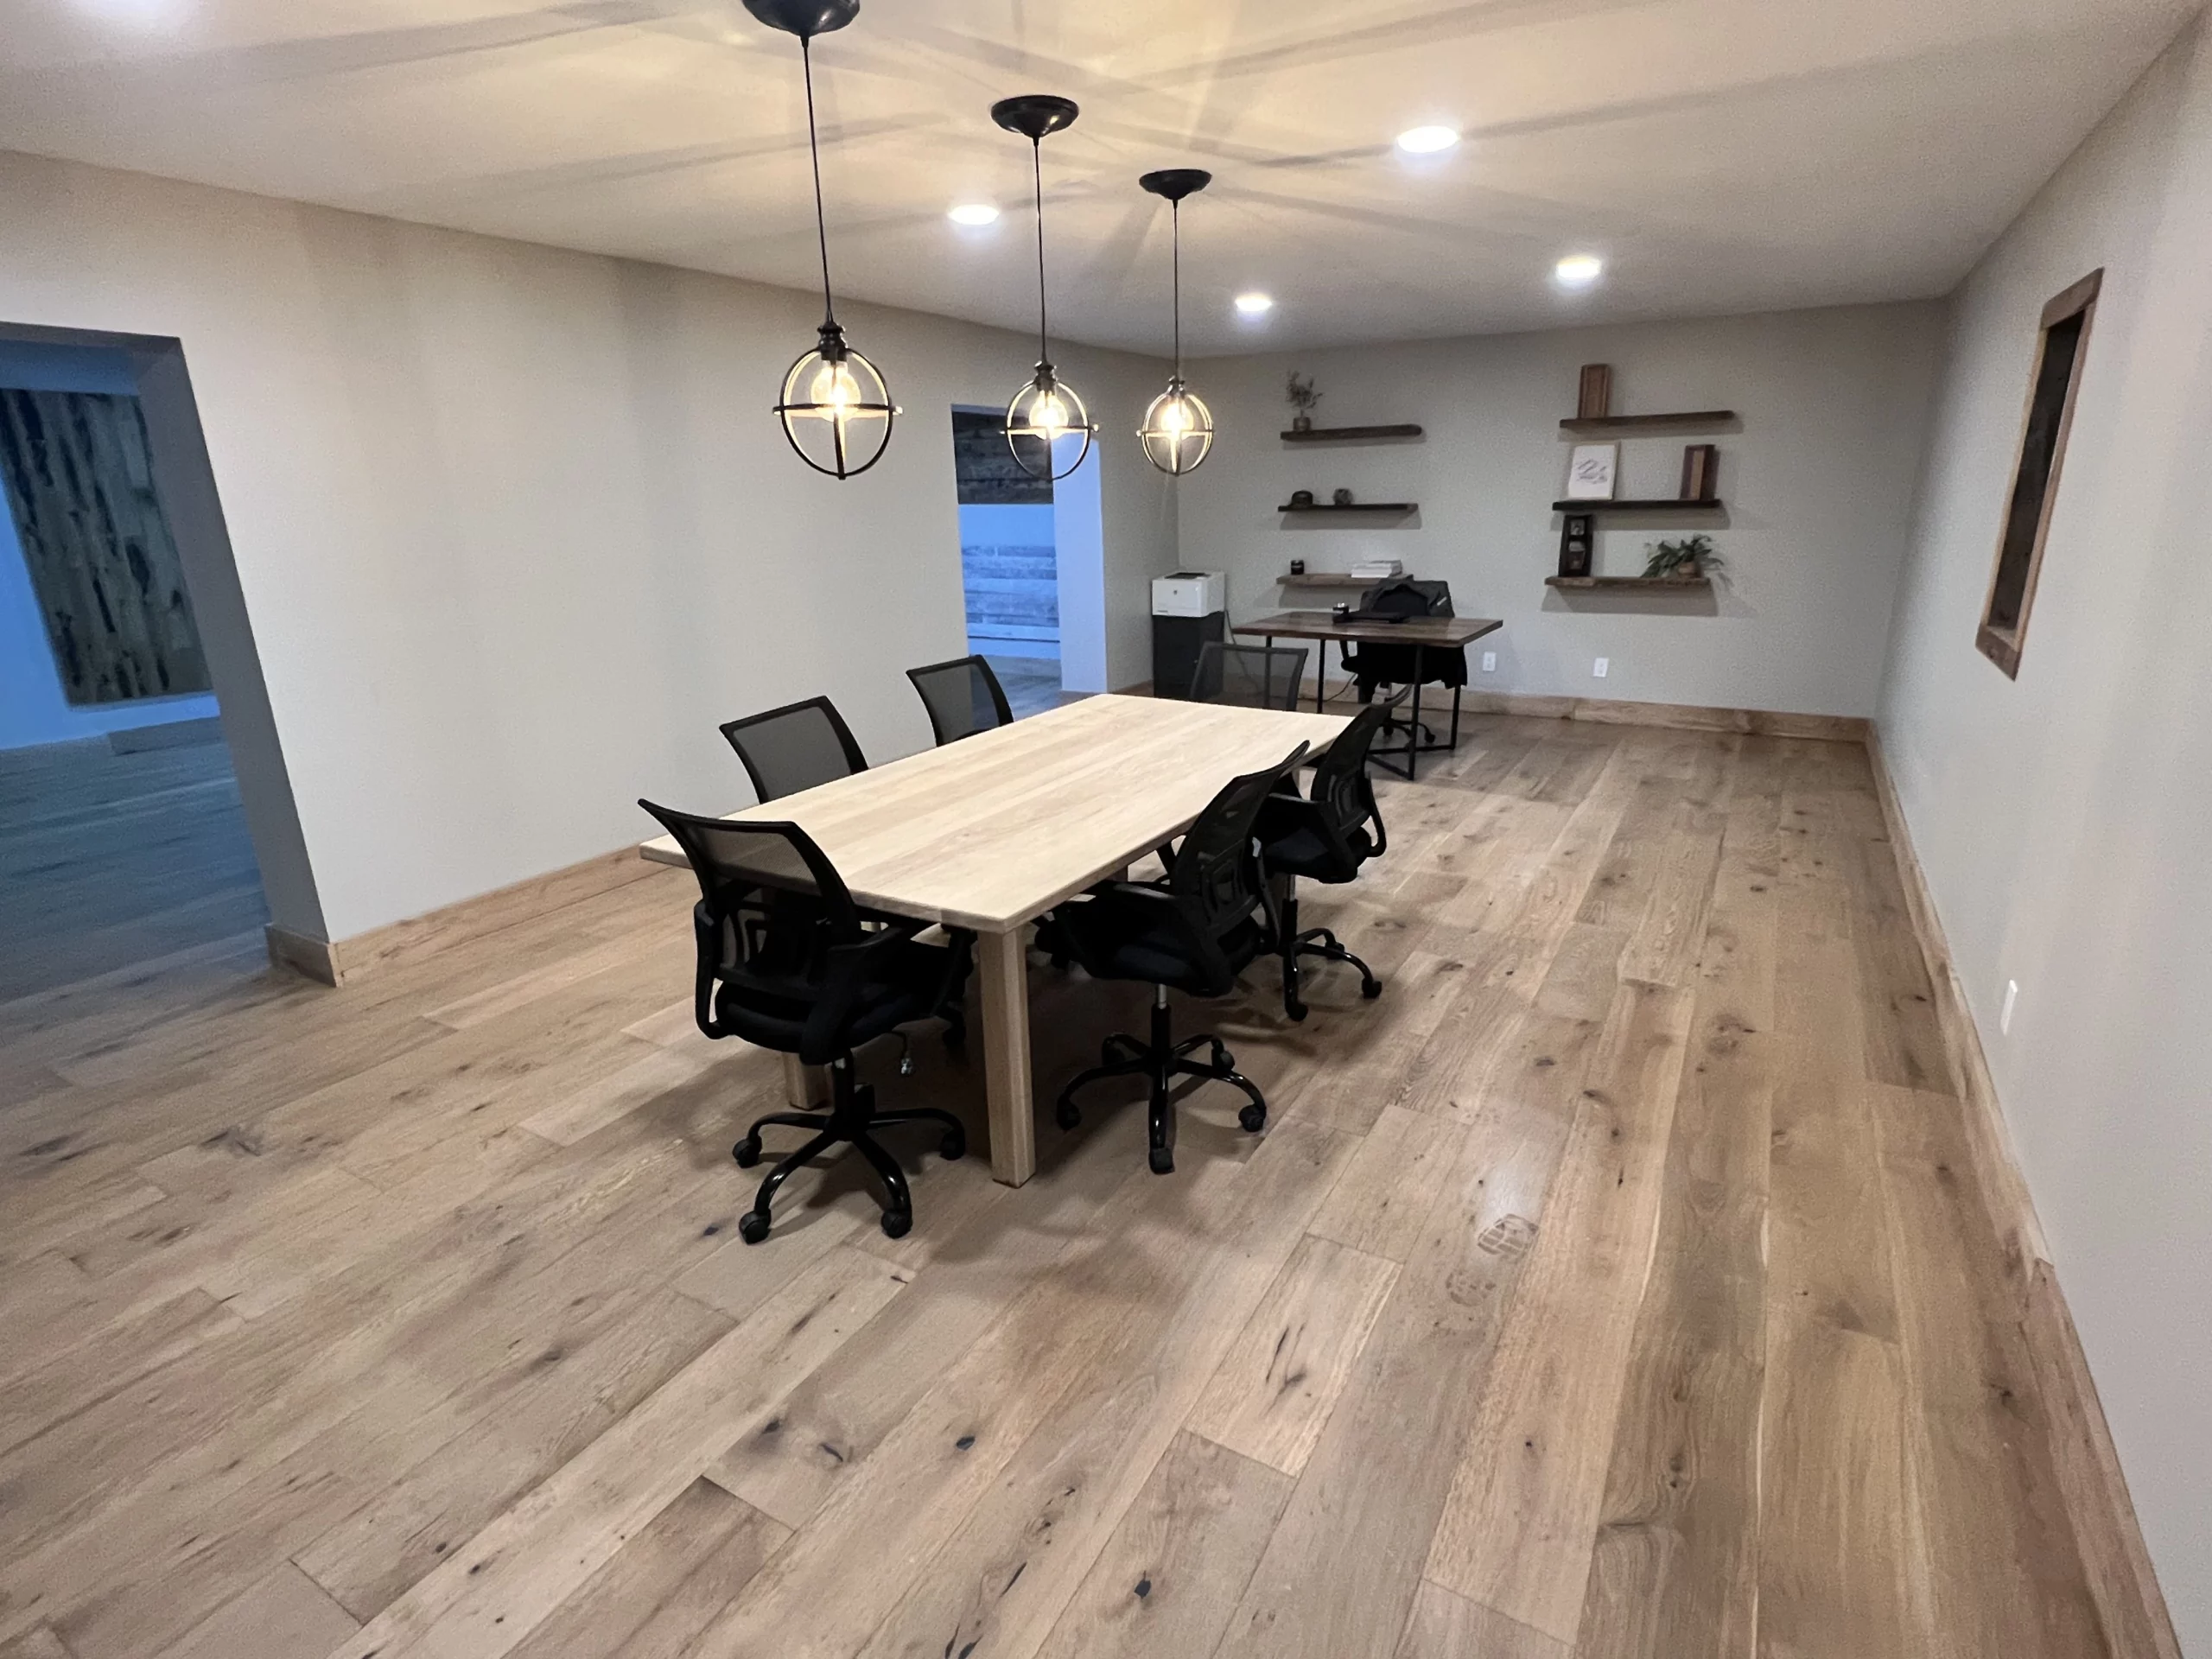 Meeting room featuring reclaimed wood flooring and wood accents